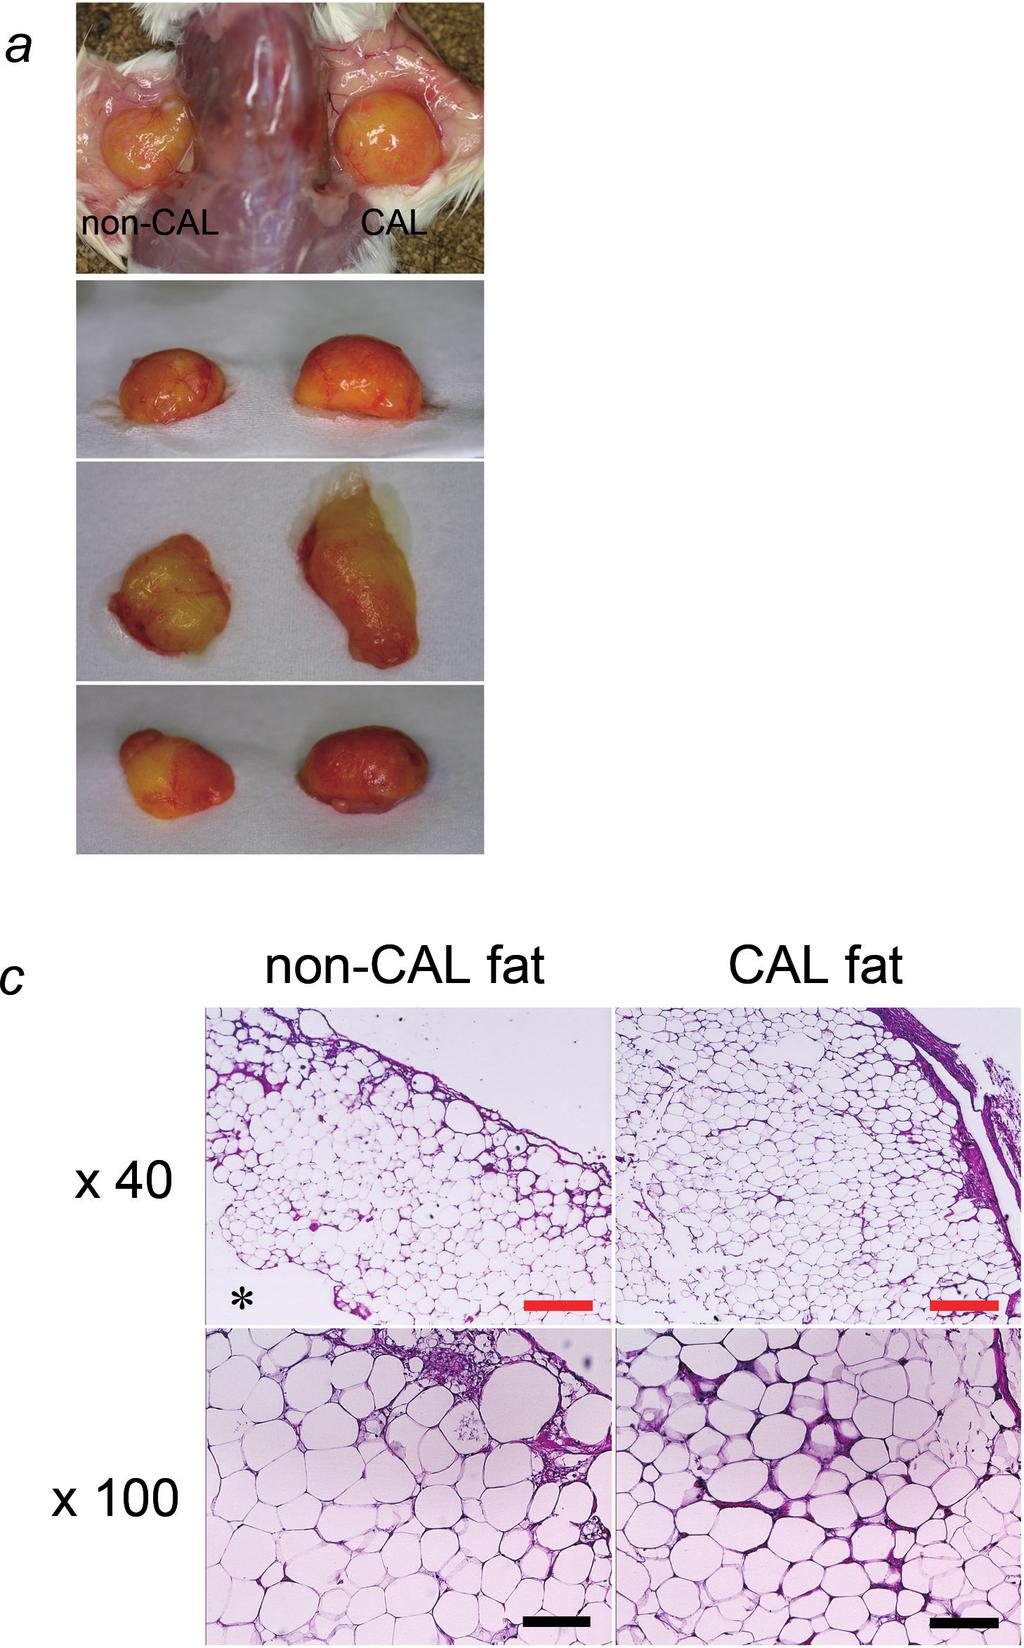 The basic structure of adipose tissue was preserved in the aspirated fat, while vascular vessels, especially large one, were significantly less detected in aspirated fat than in excised fat.